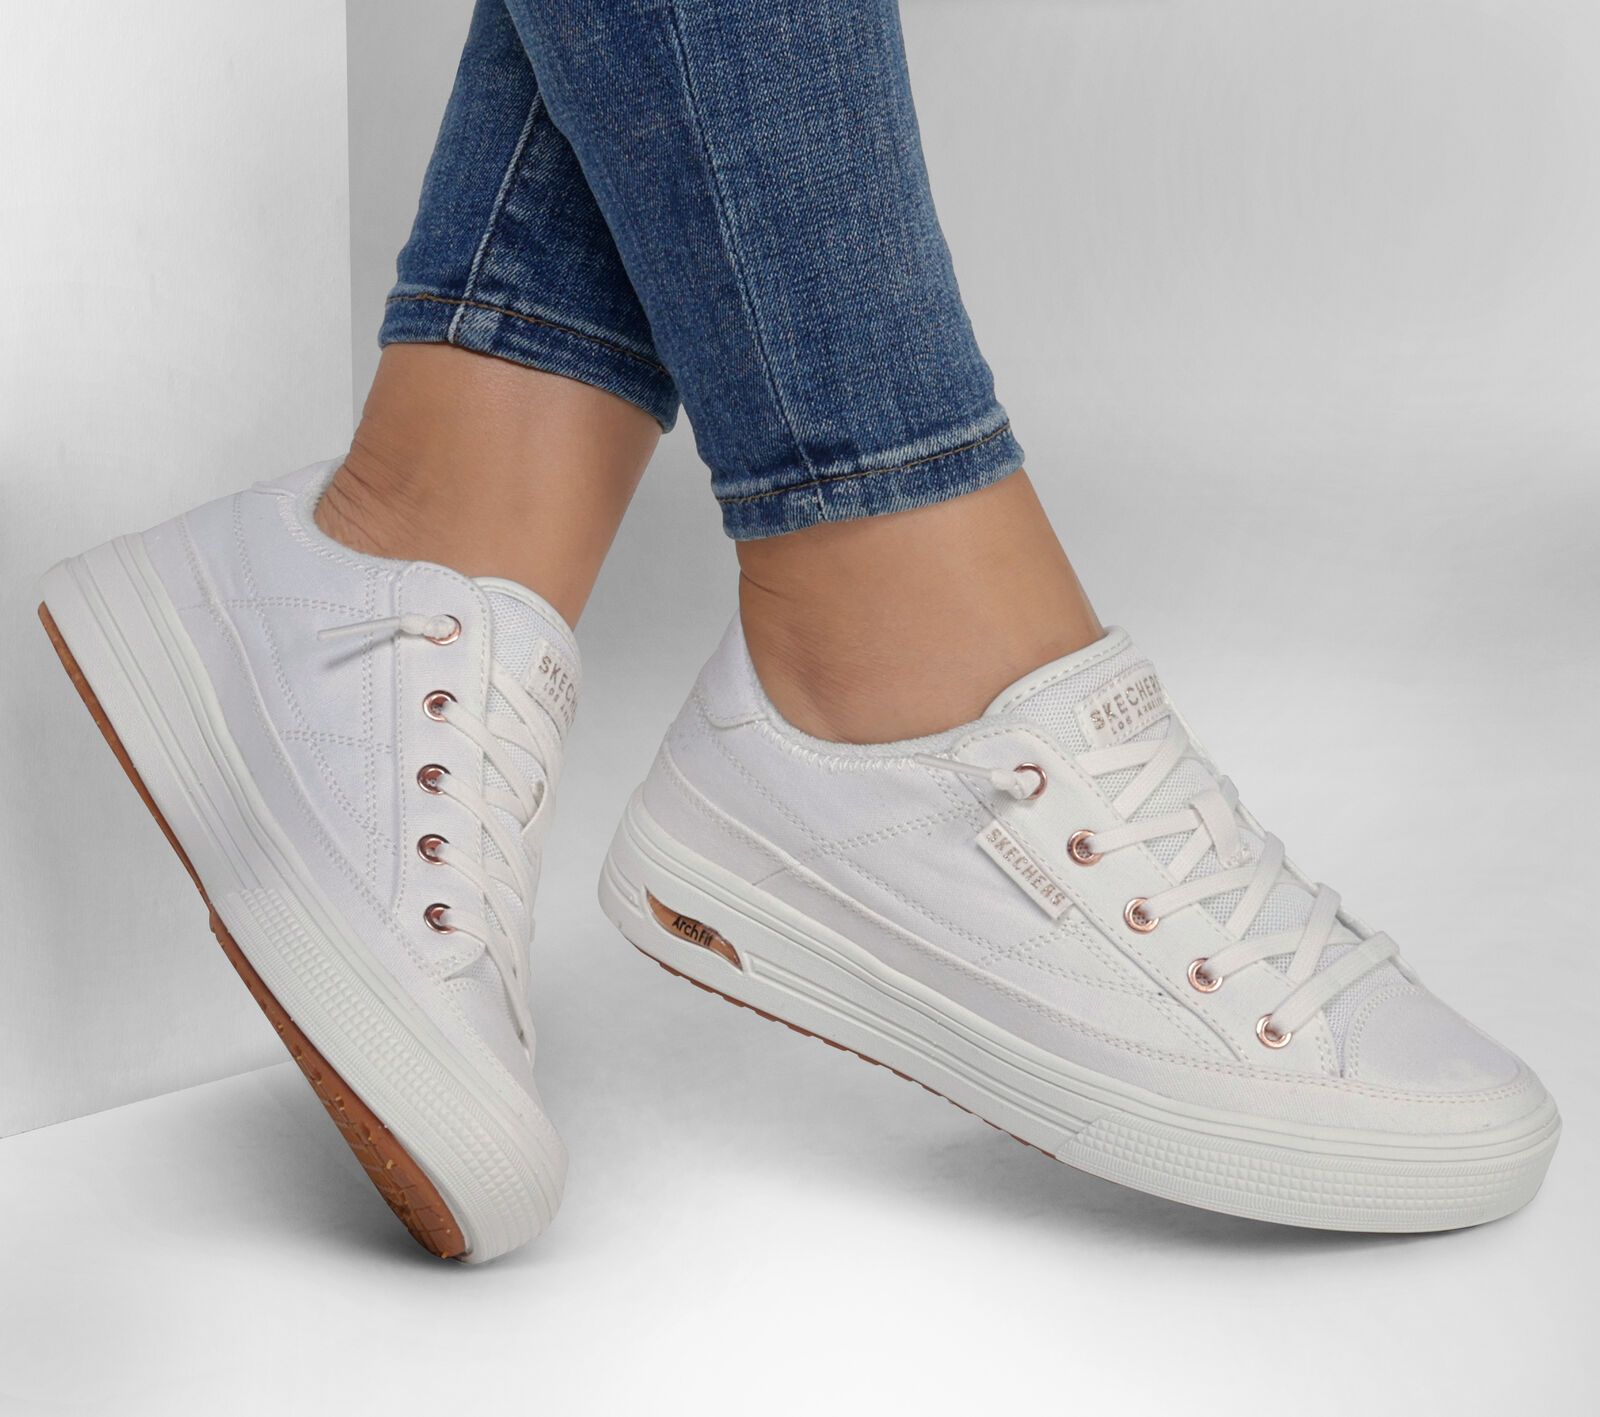 Sneakers Women Pictures | Download Free Images on Unsplash